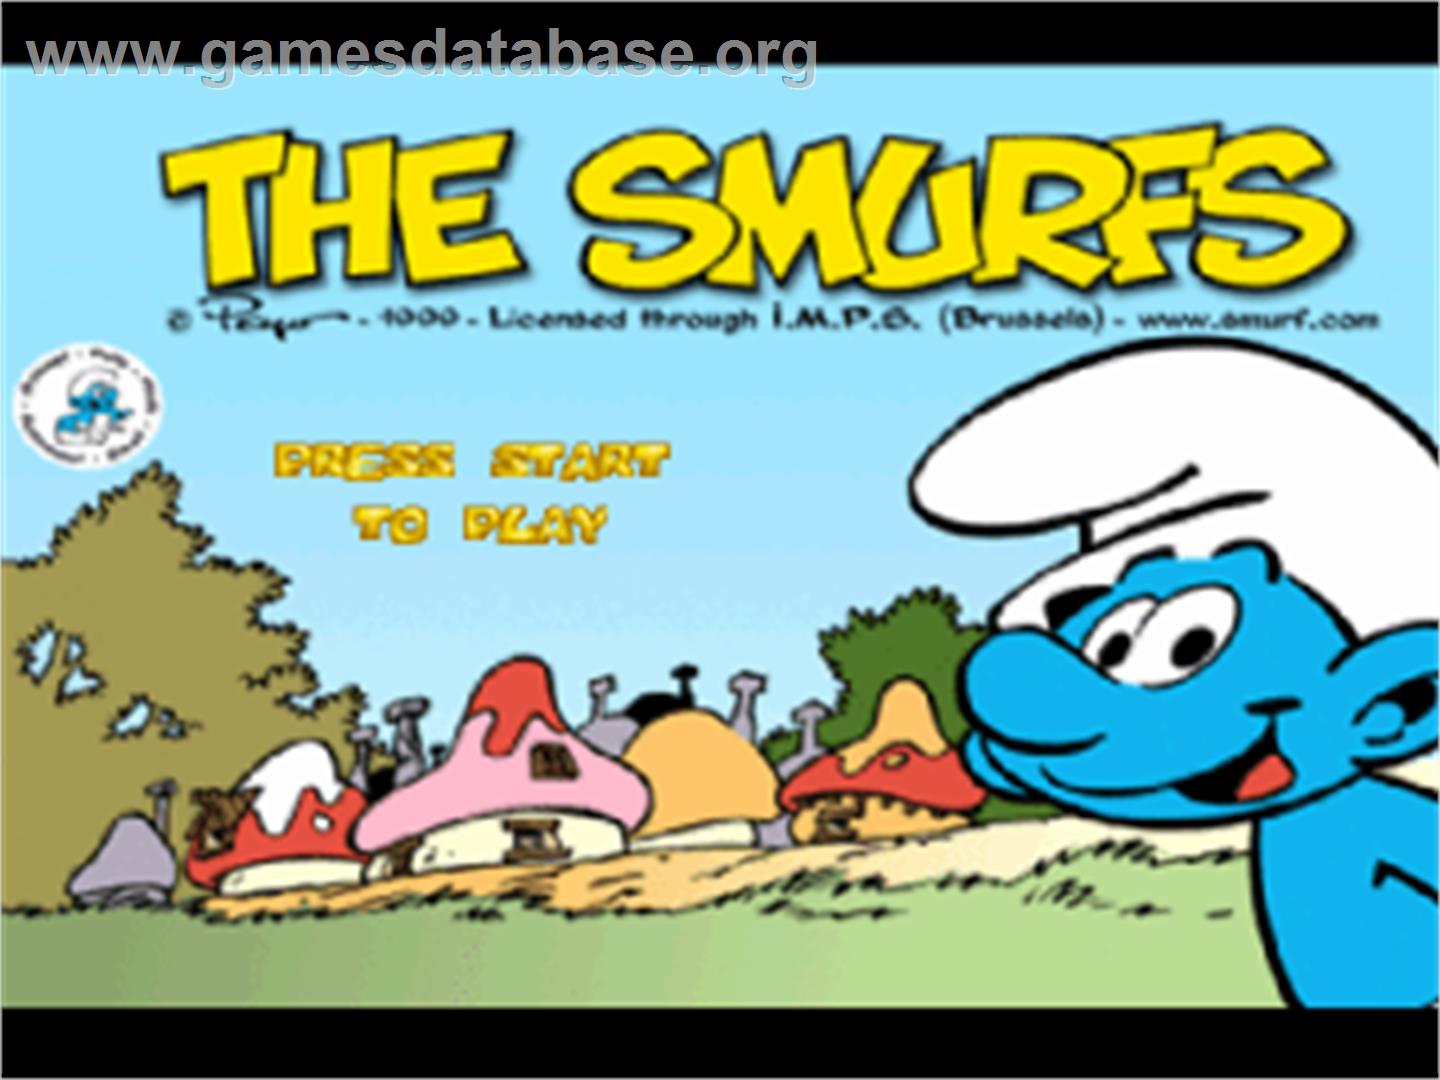 The Smurfs - Sony Playstation - Artwork - Title Screen